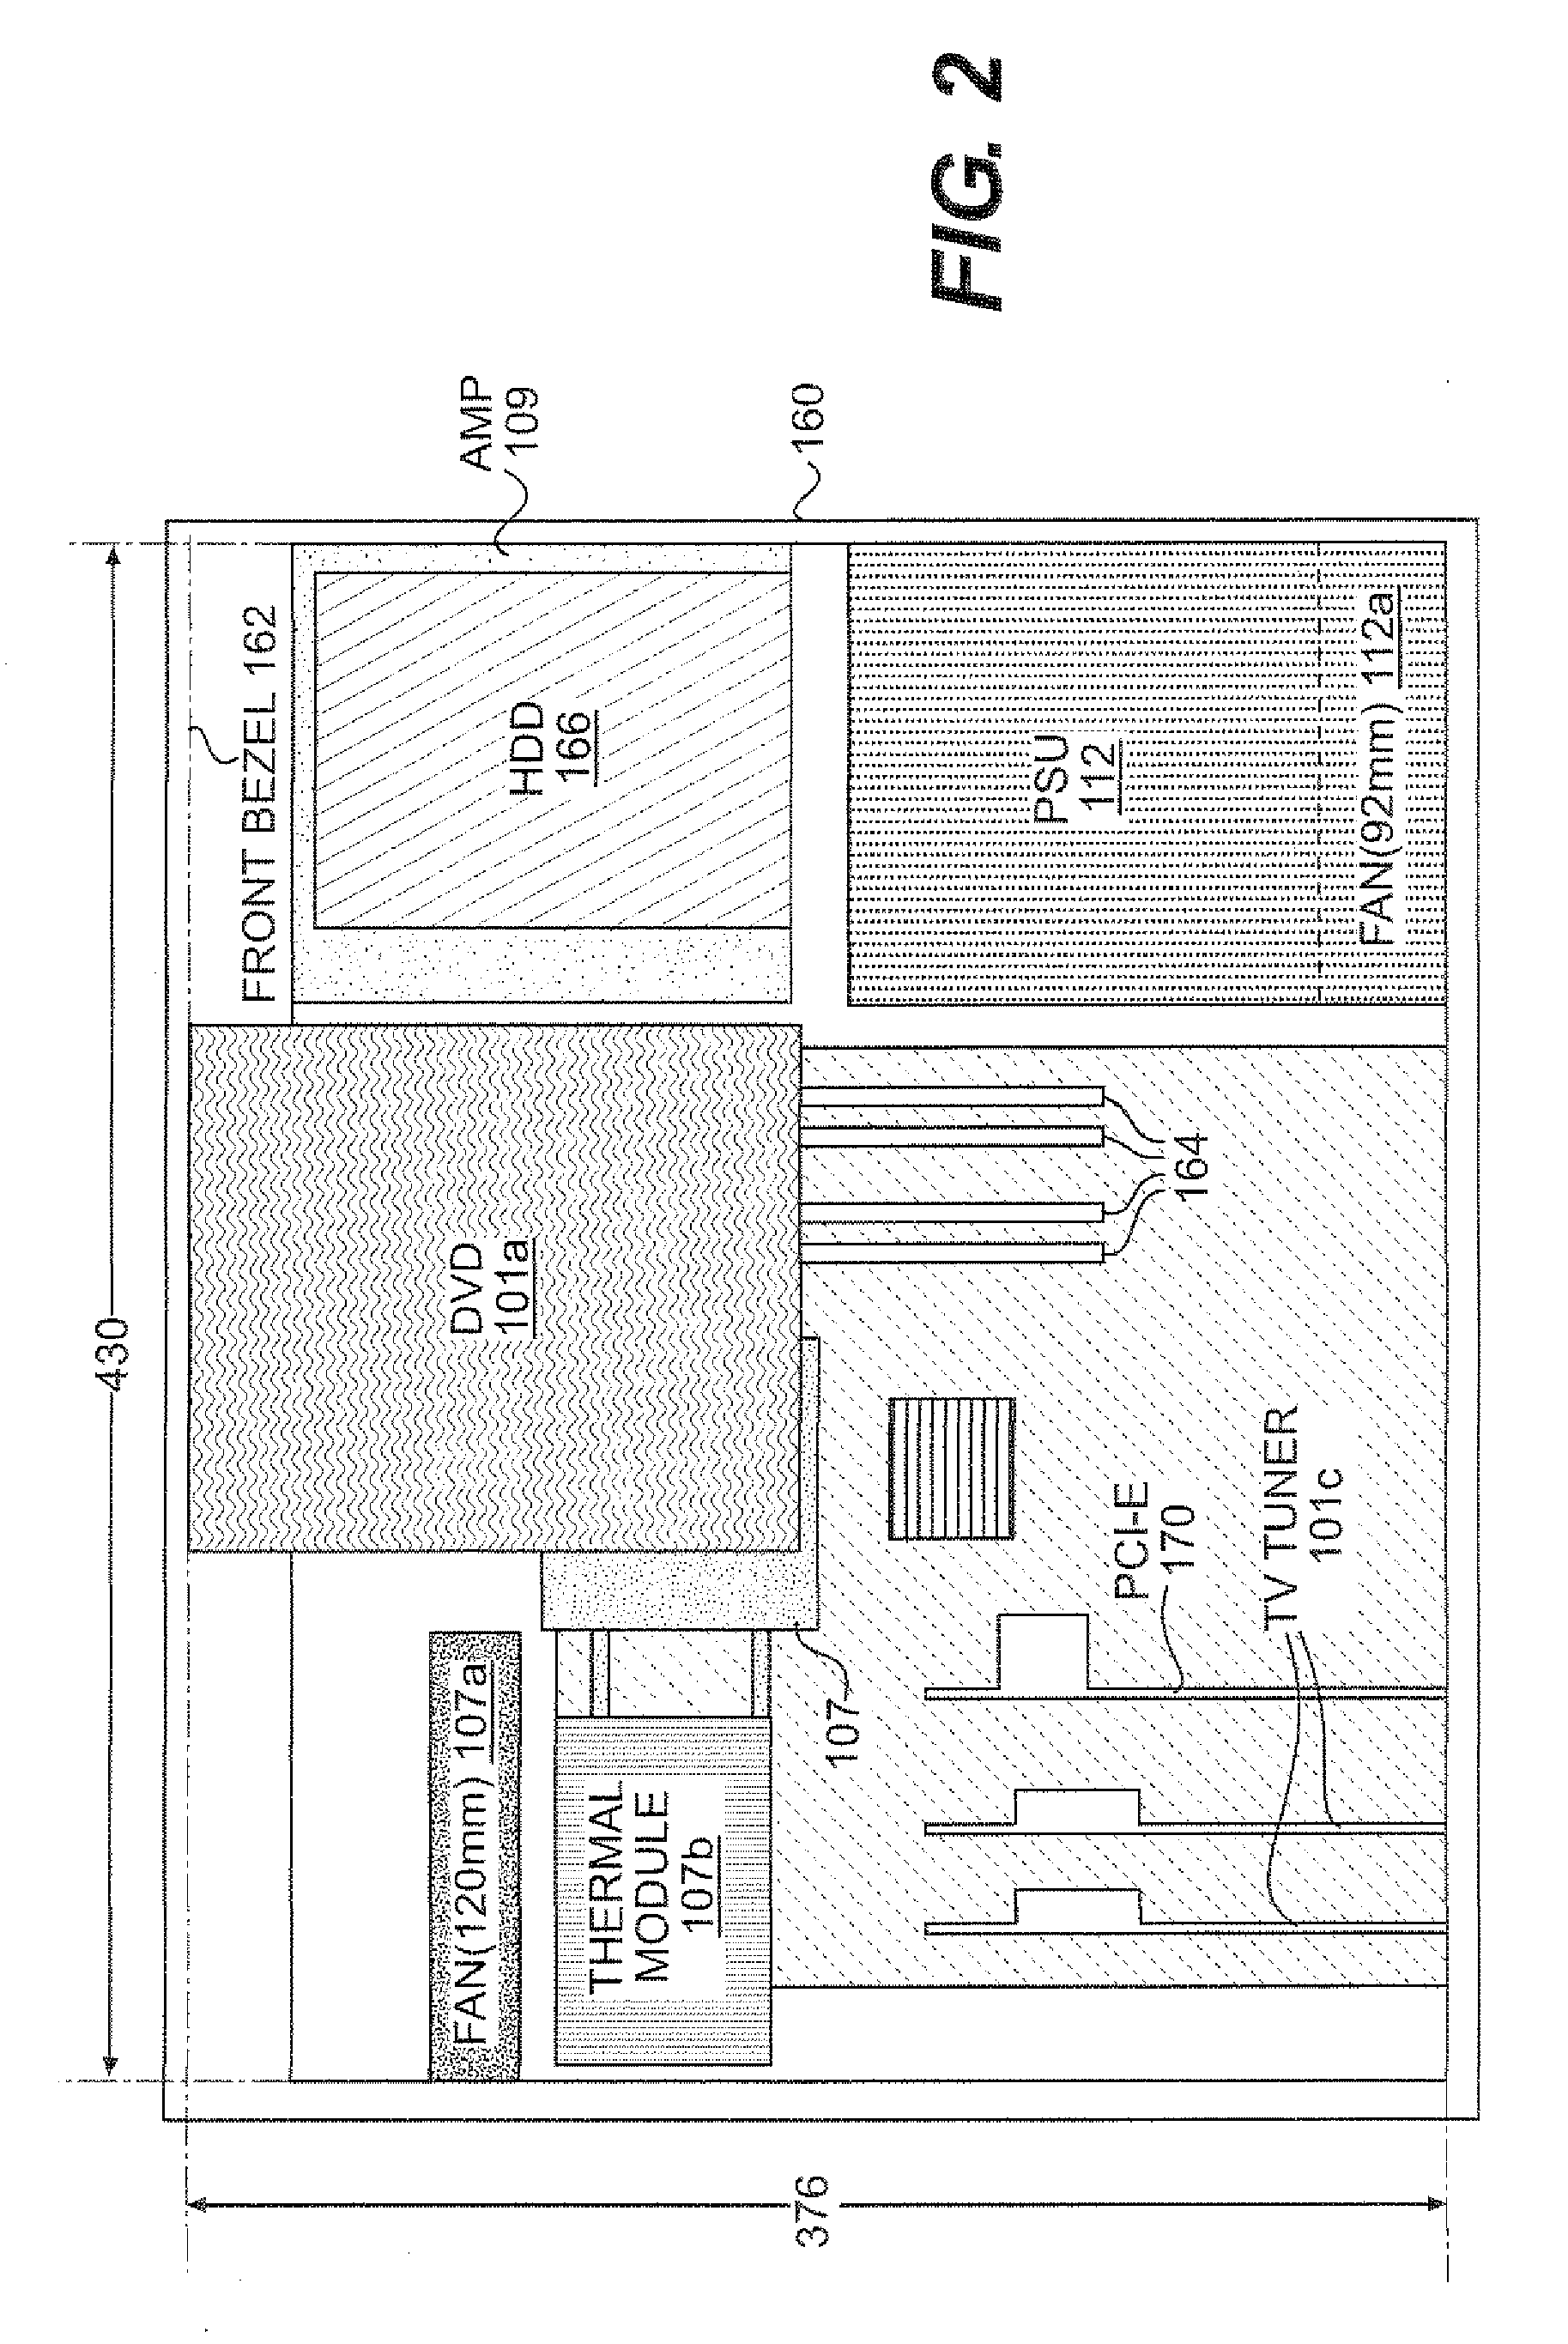 Integrated audio video signal processing system using centralized processing of signals